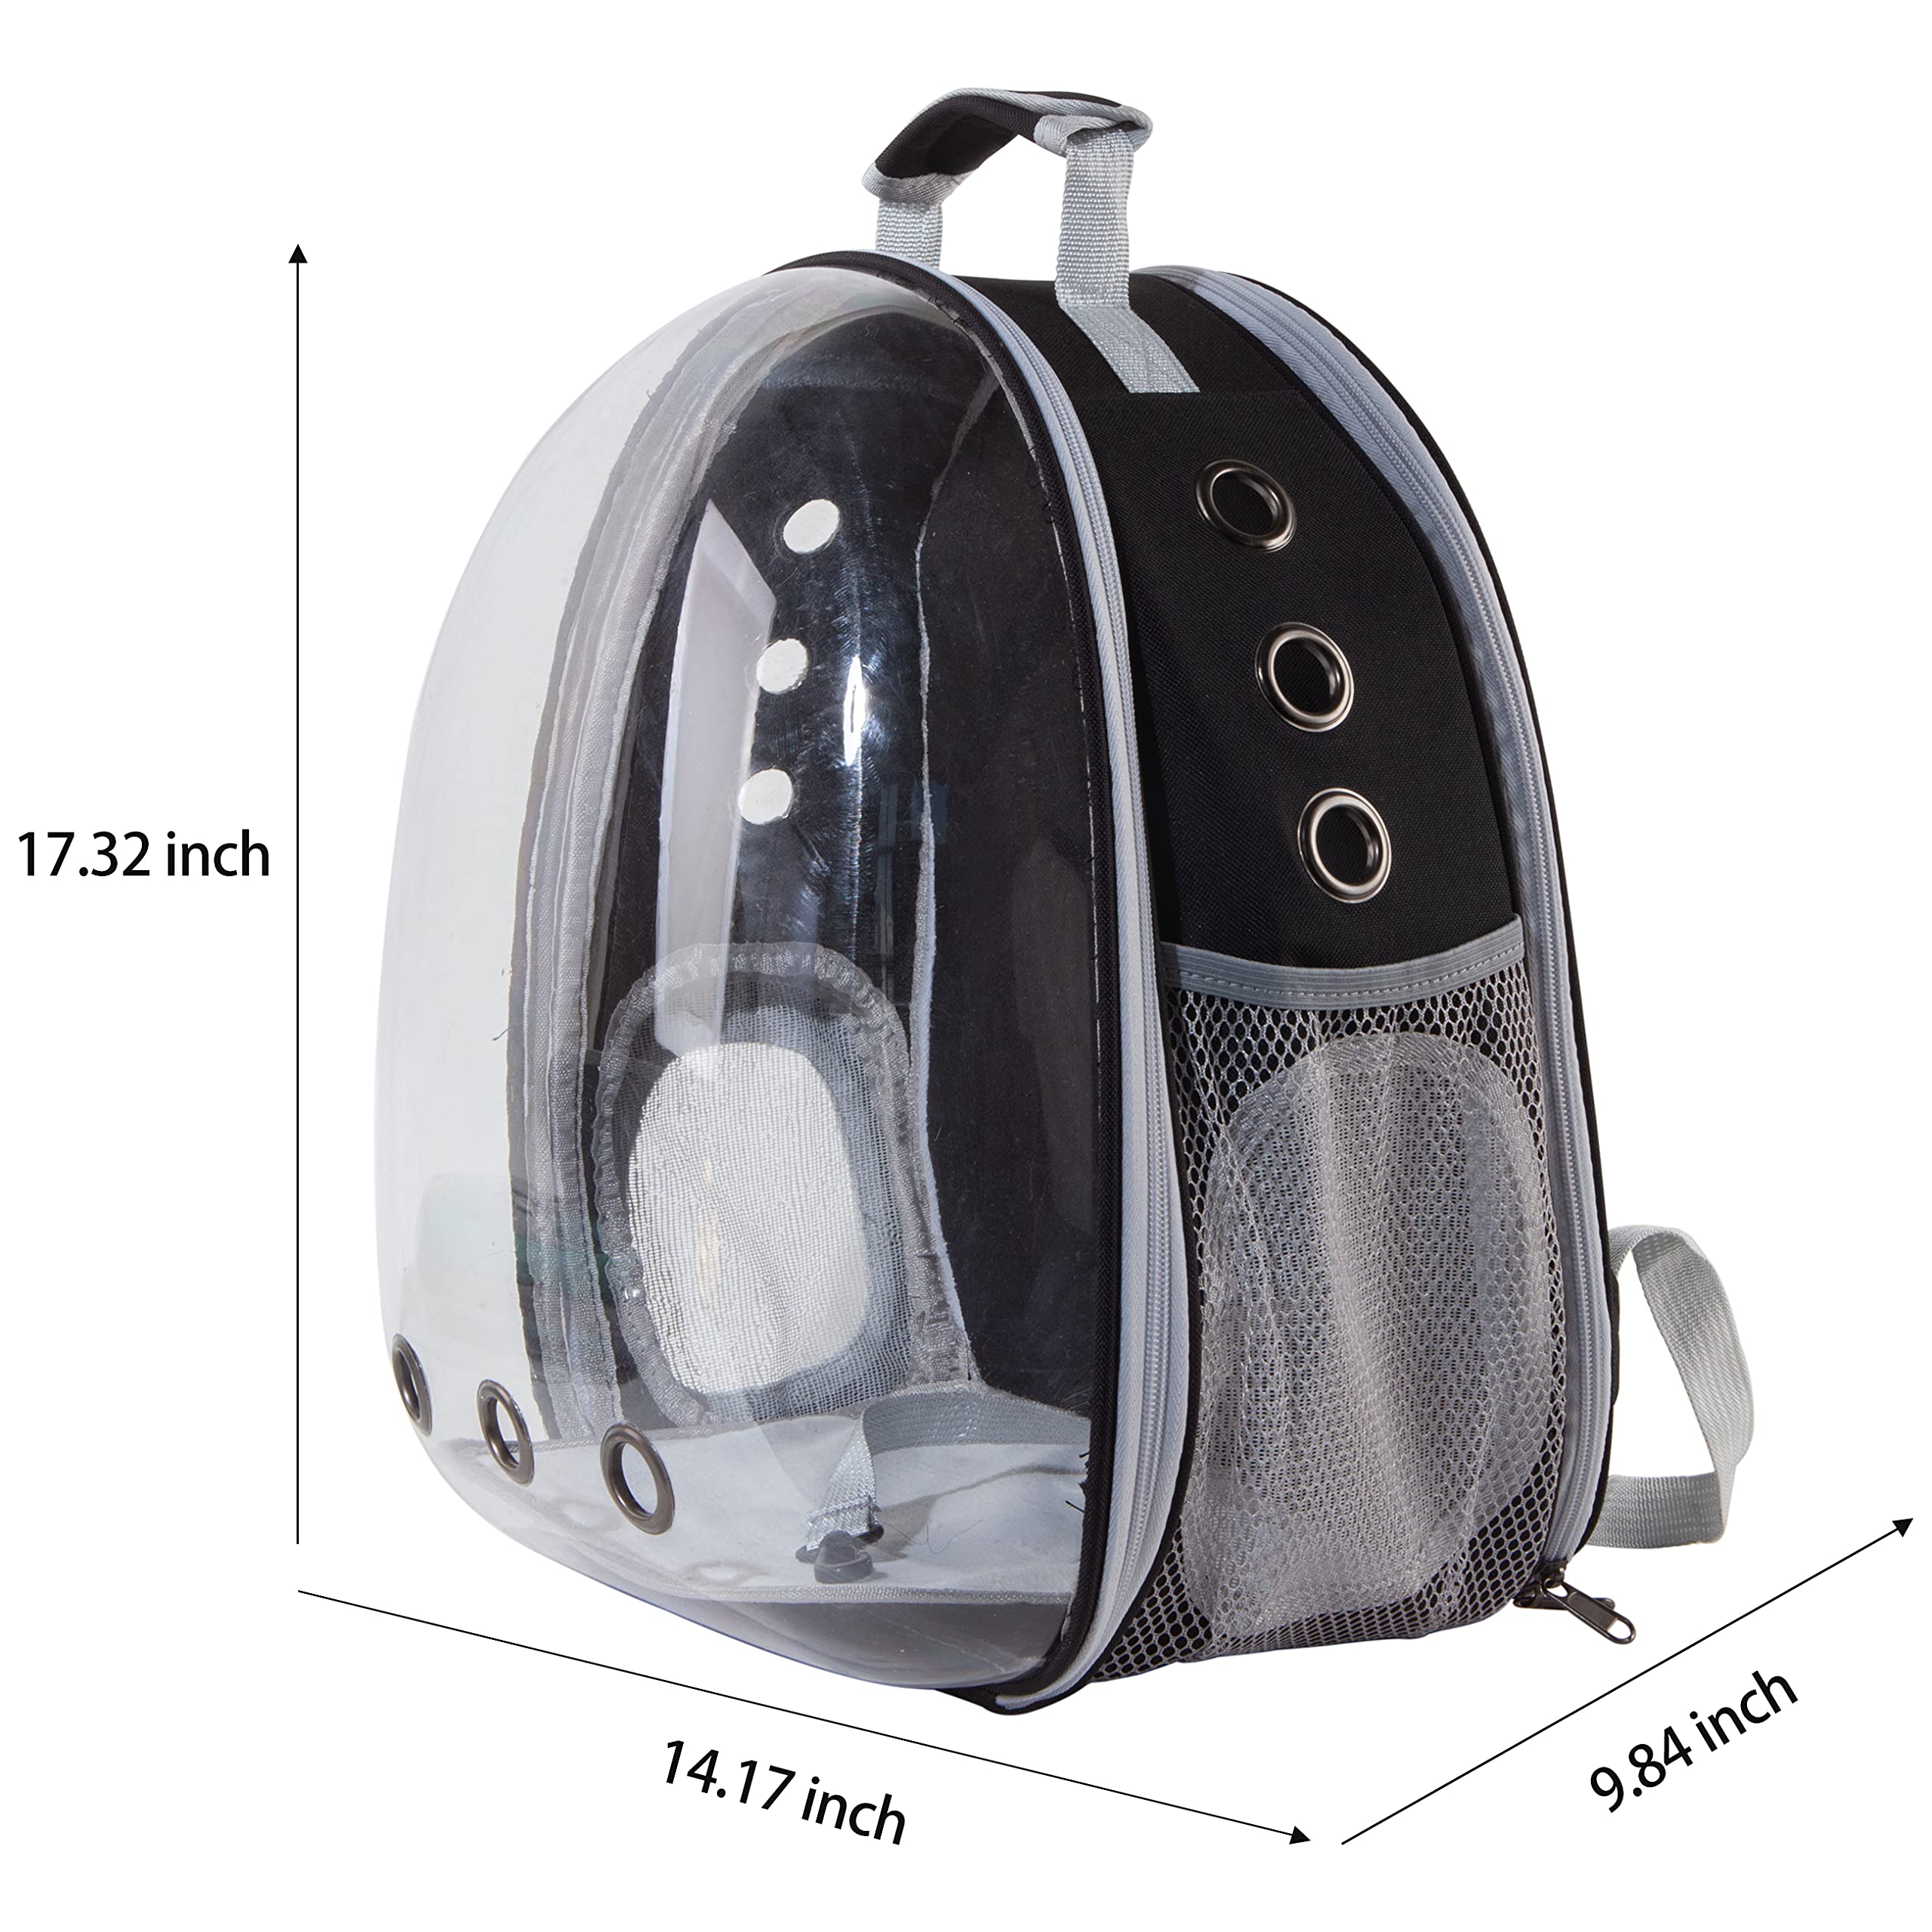 XZKING Cat Backpack Carrier Bubble Bag, Transparent Space Capsule Pet Carrier Dog Hiking Backpack, Small Dog Backpack Carrier for Cats Puppies Airline Approved Travel Carrier Outdoor Use Black